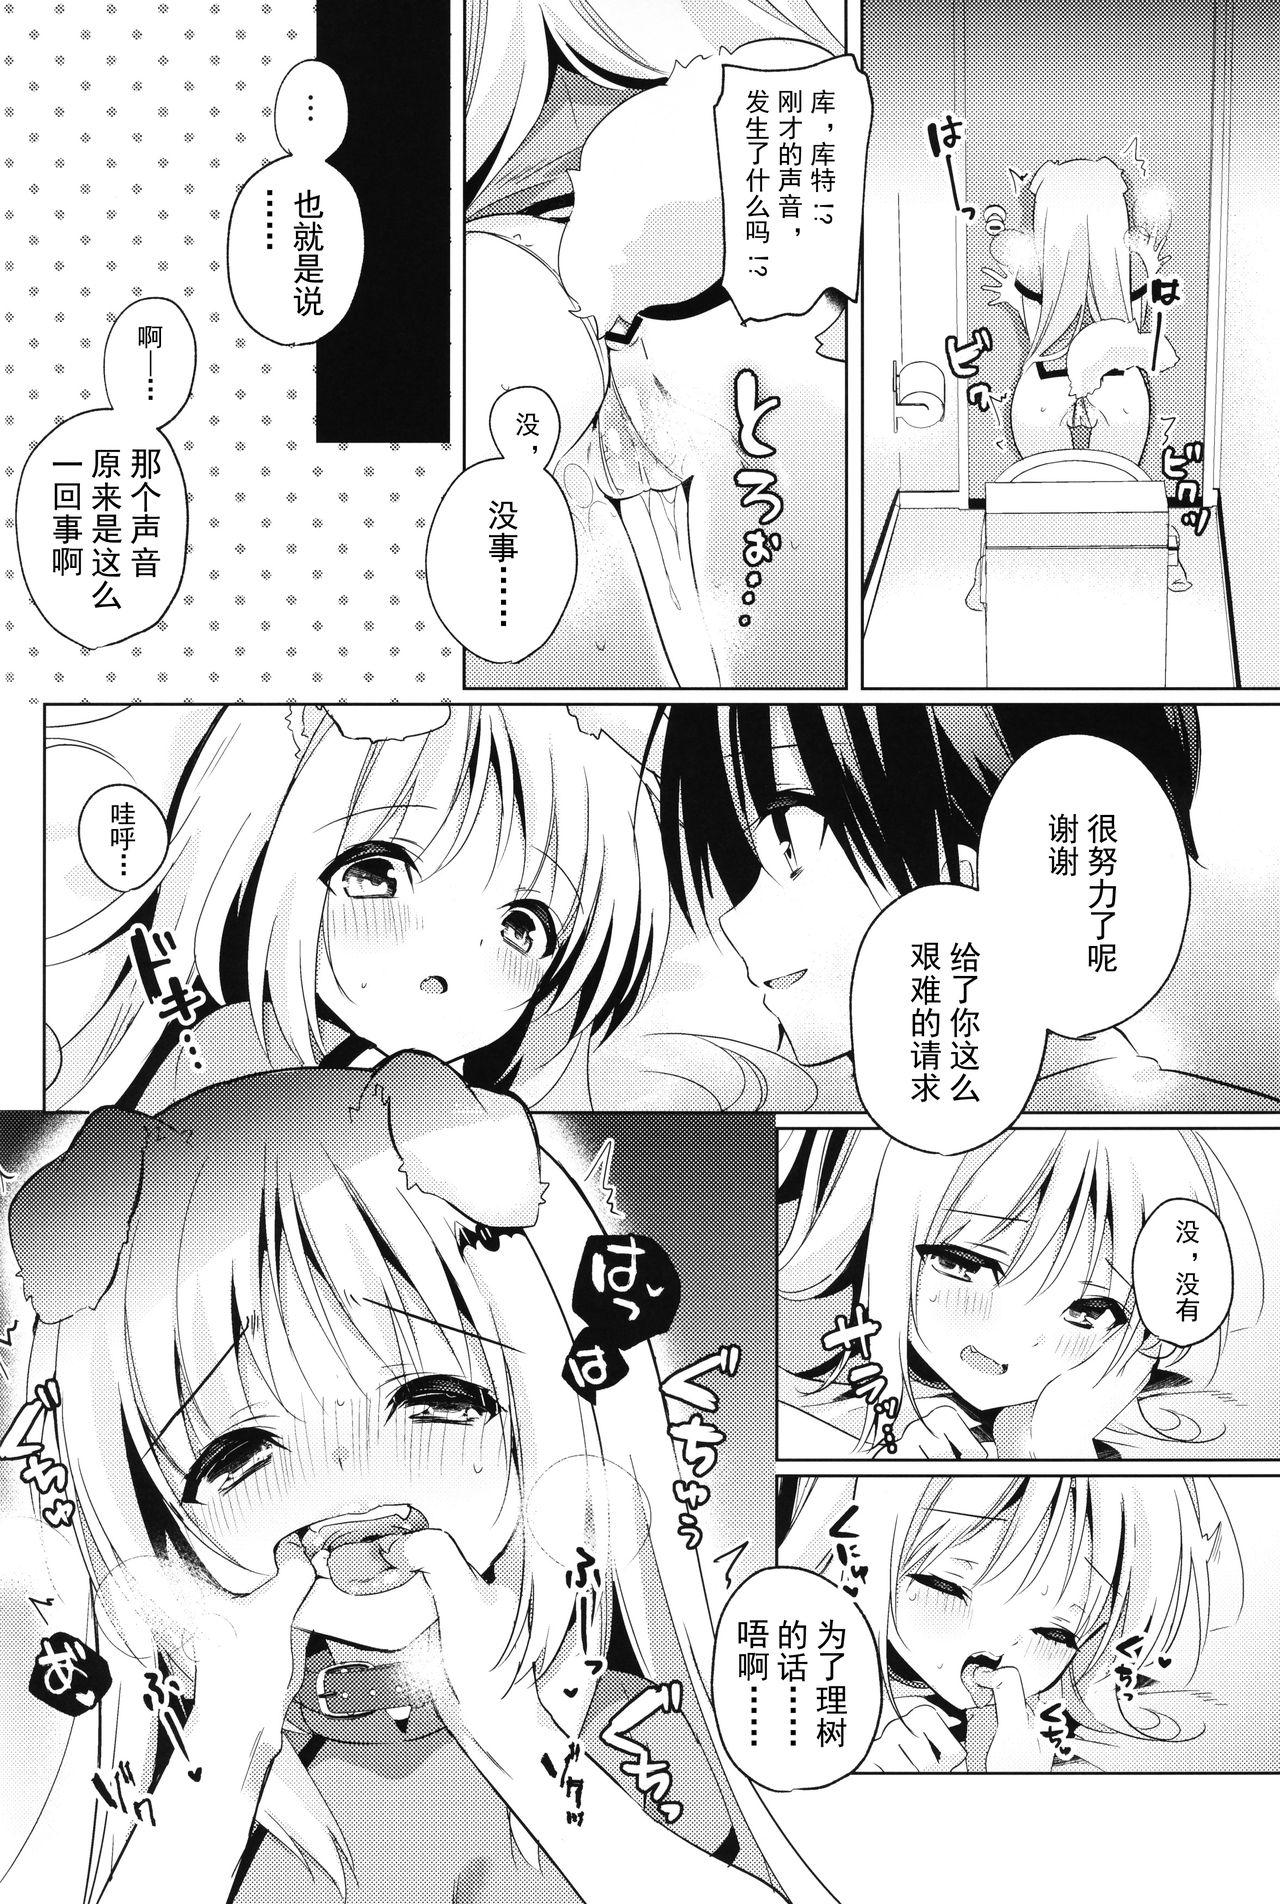 Harcore Kud After4 - Little busters Story - Page 10